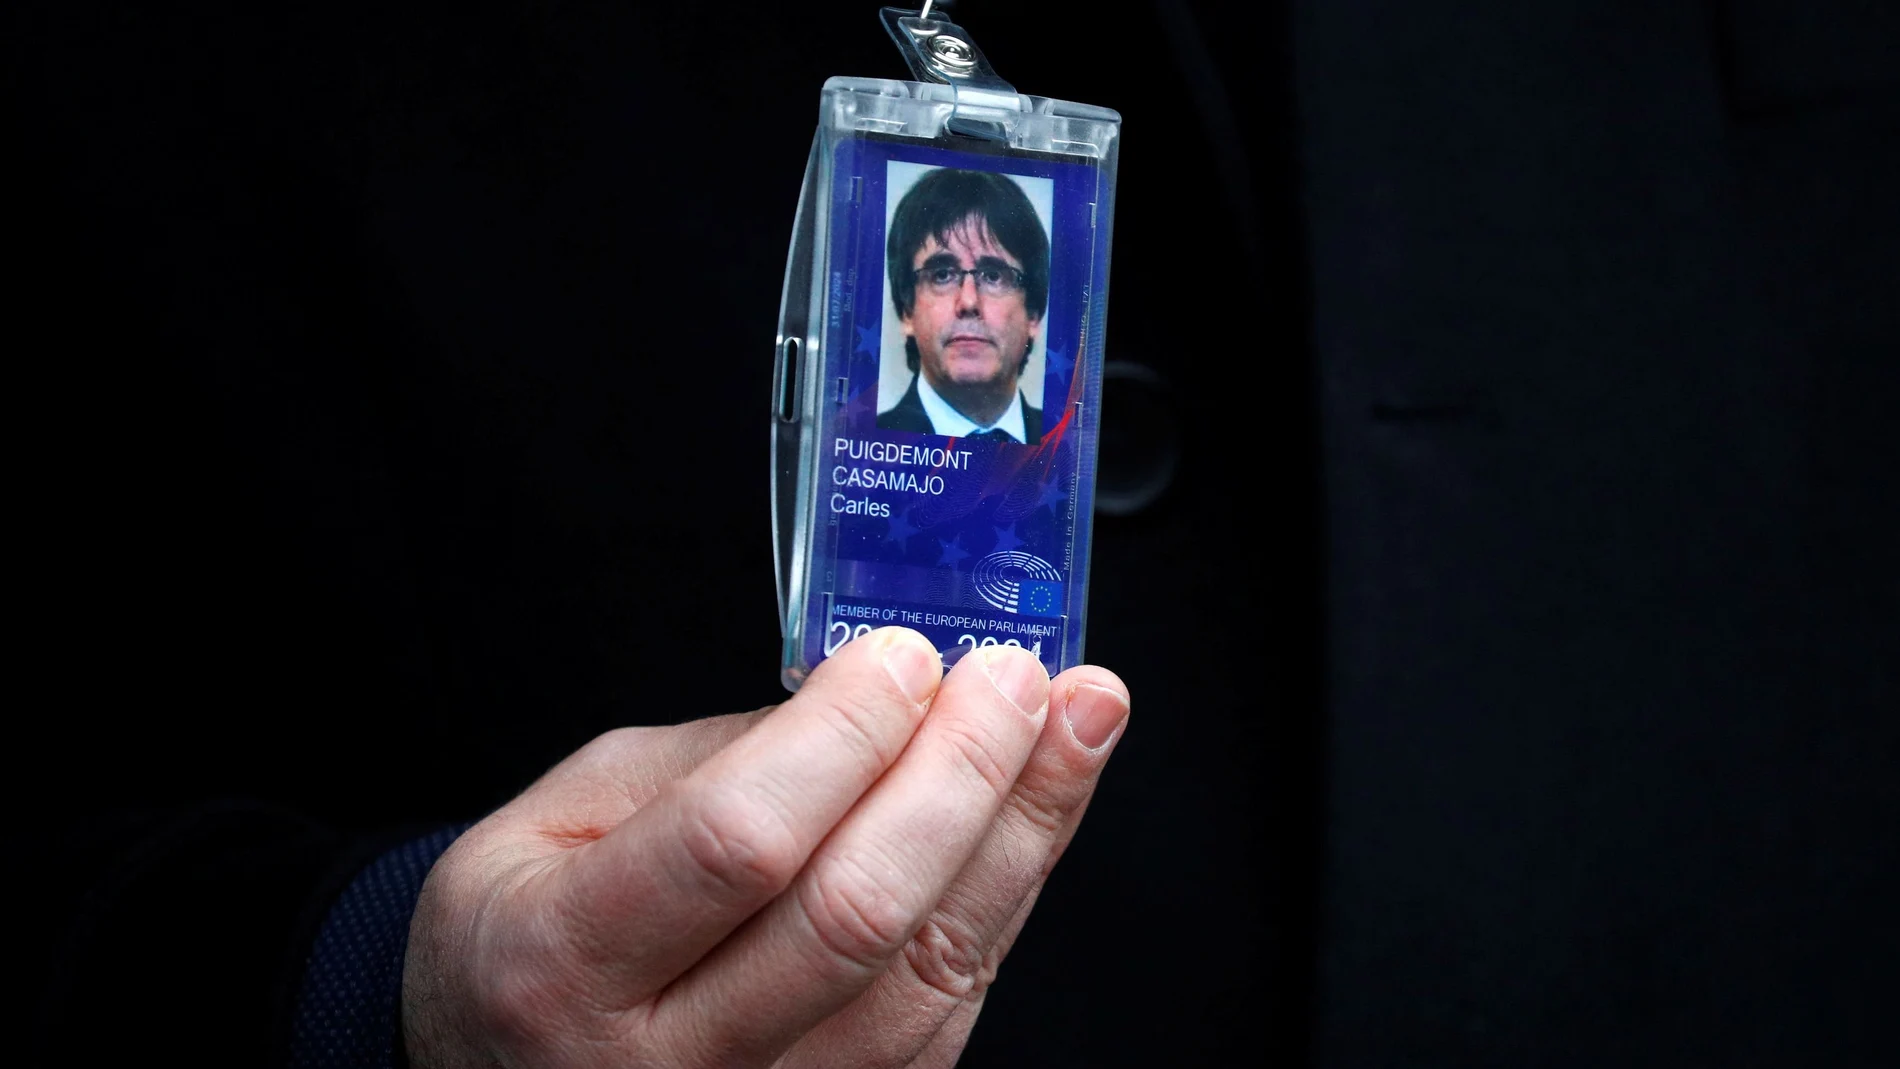 Former member of the Catalan government Puigdemont shows his badge outside the EU Parliament in Brussels